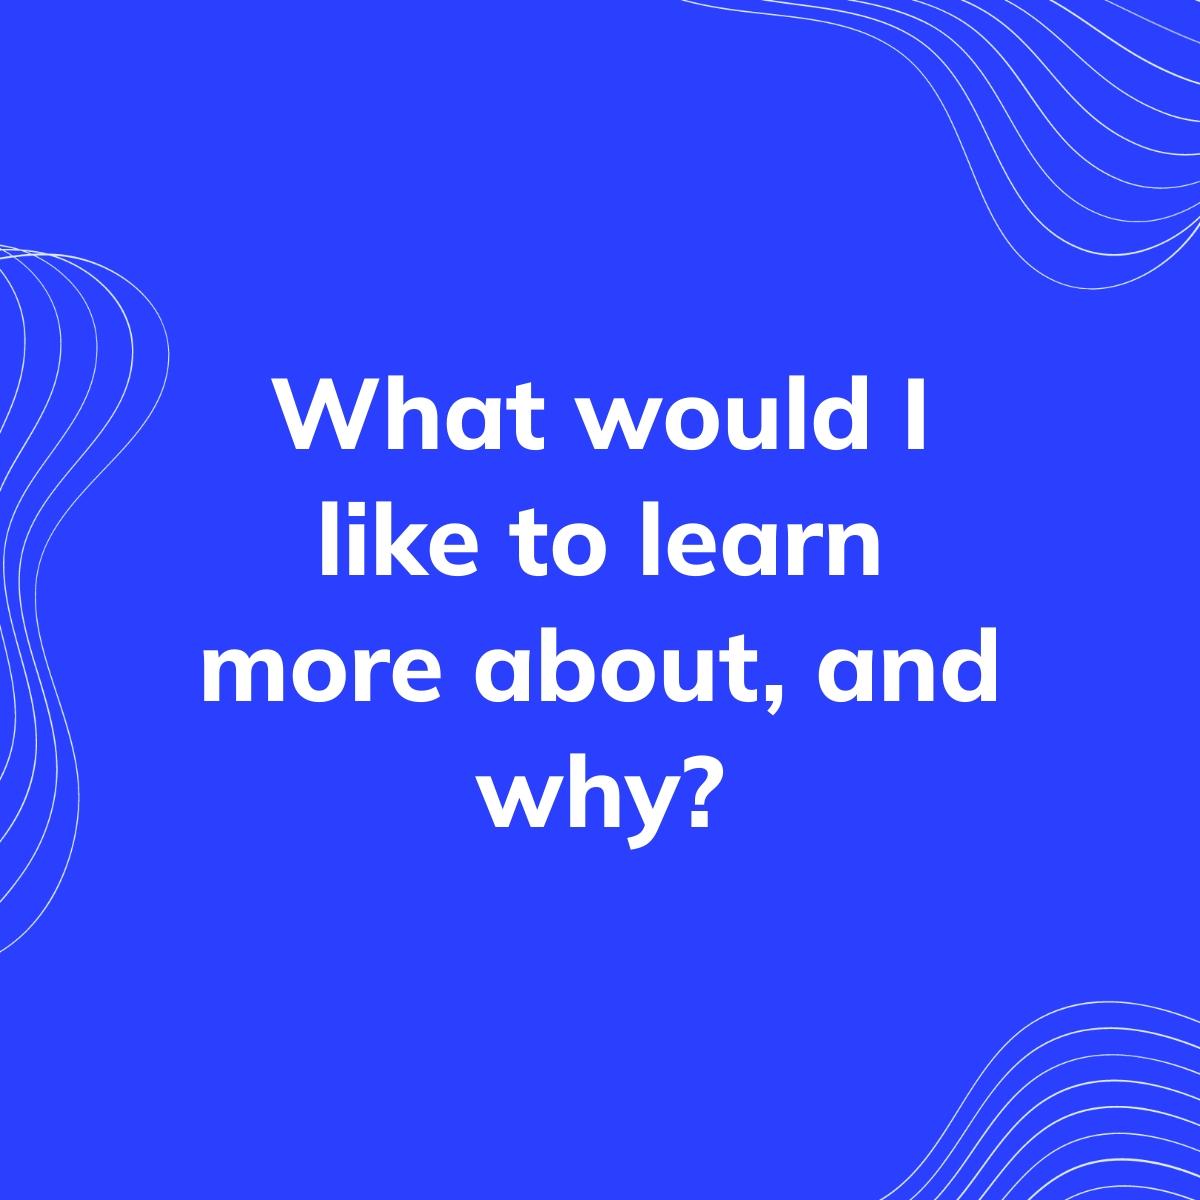 Journal Prompt: What would I like to learn more about, and why?